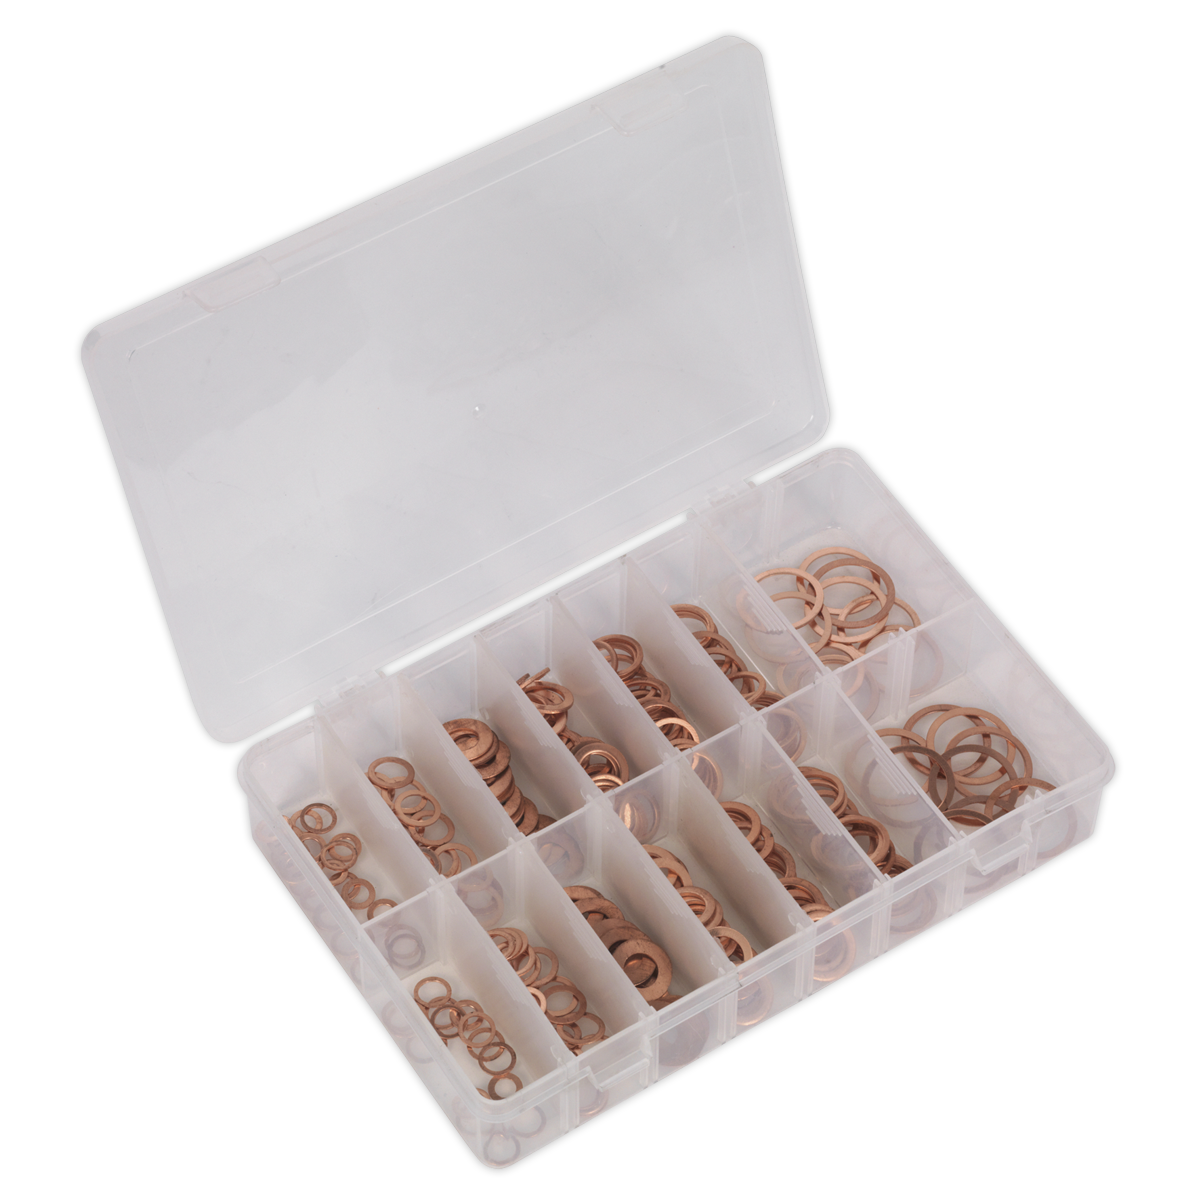 Diesel Injector Copper Washer Assortment 250pc - Metric